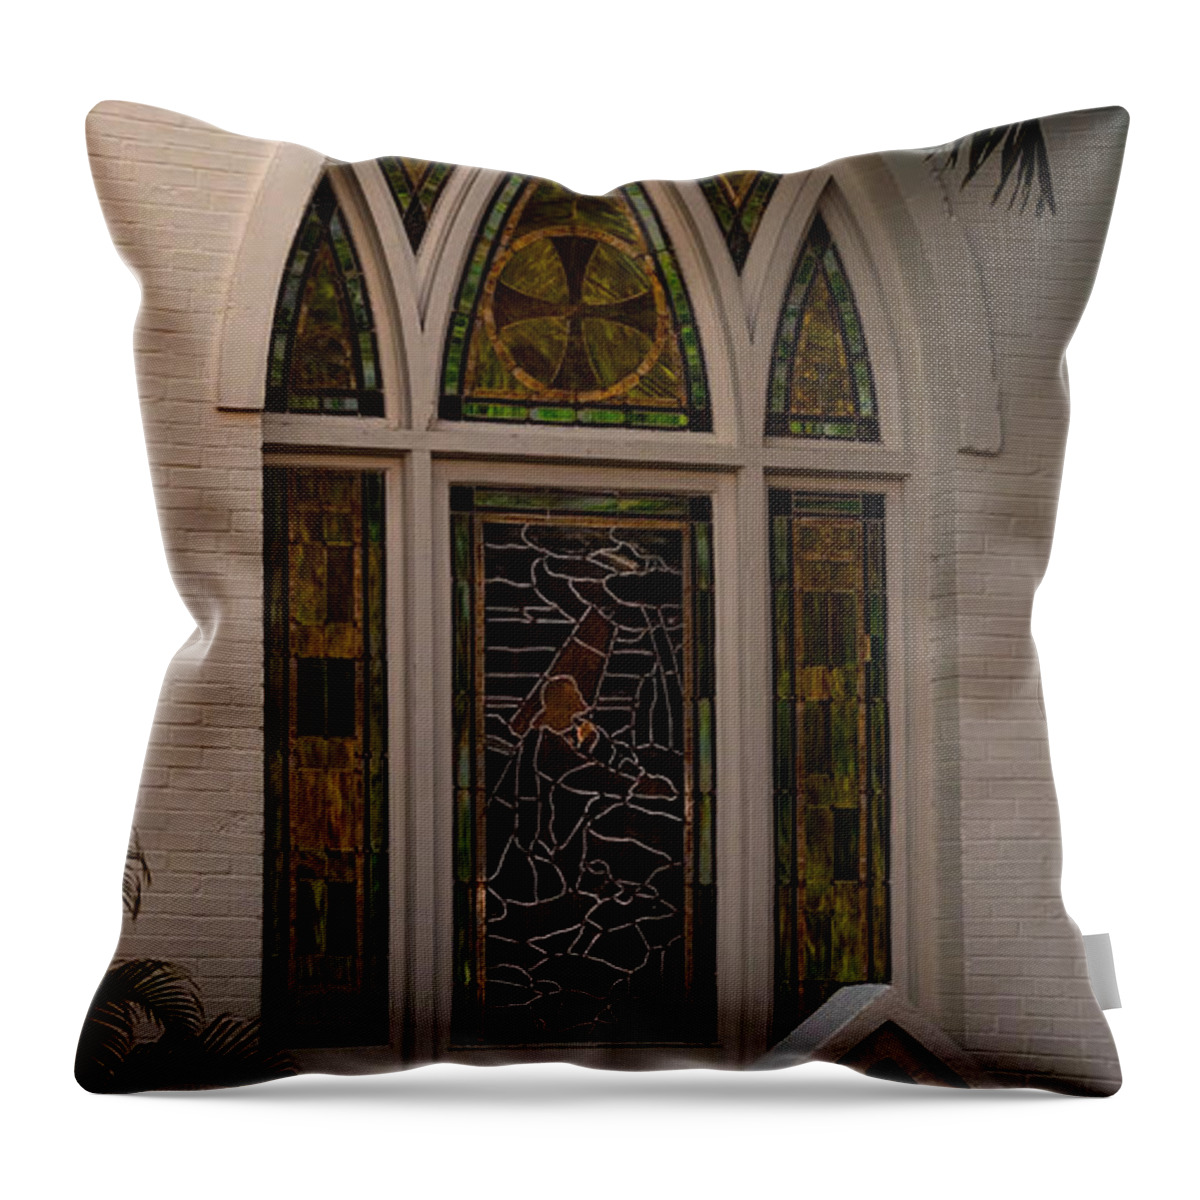 Ame Church Throw Pillow featuring the photograph Bethel A M E Key West by Ed Gleichman